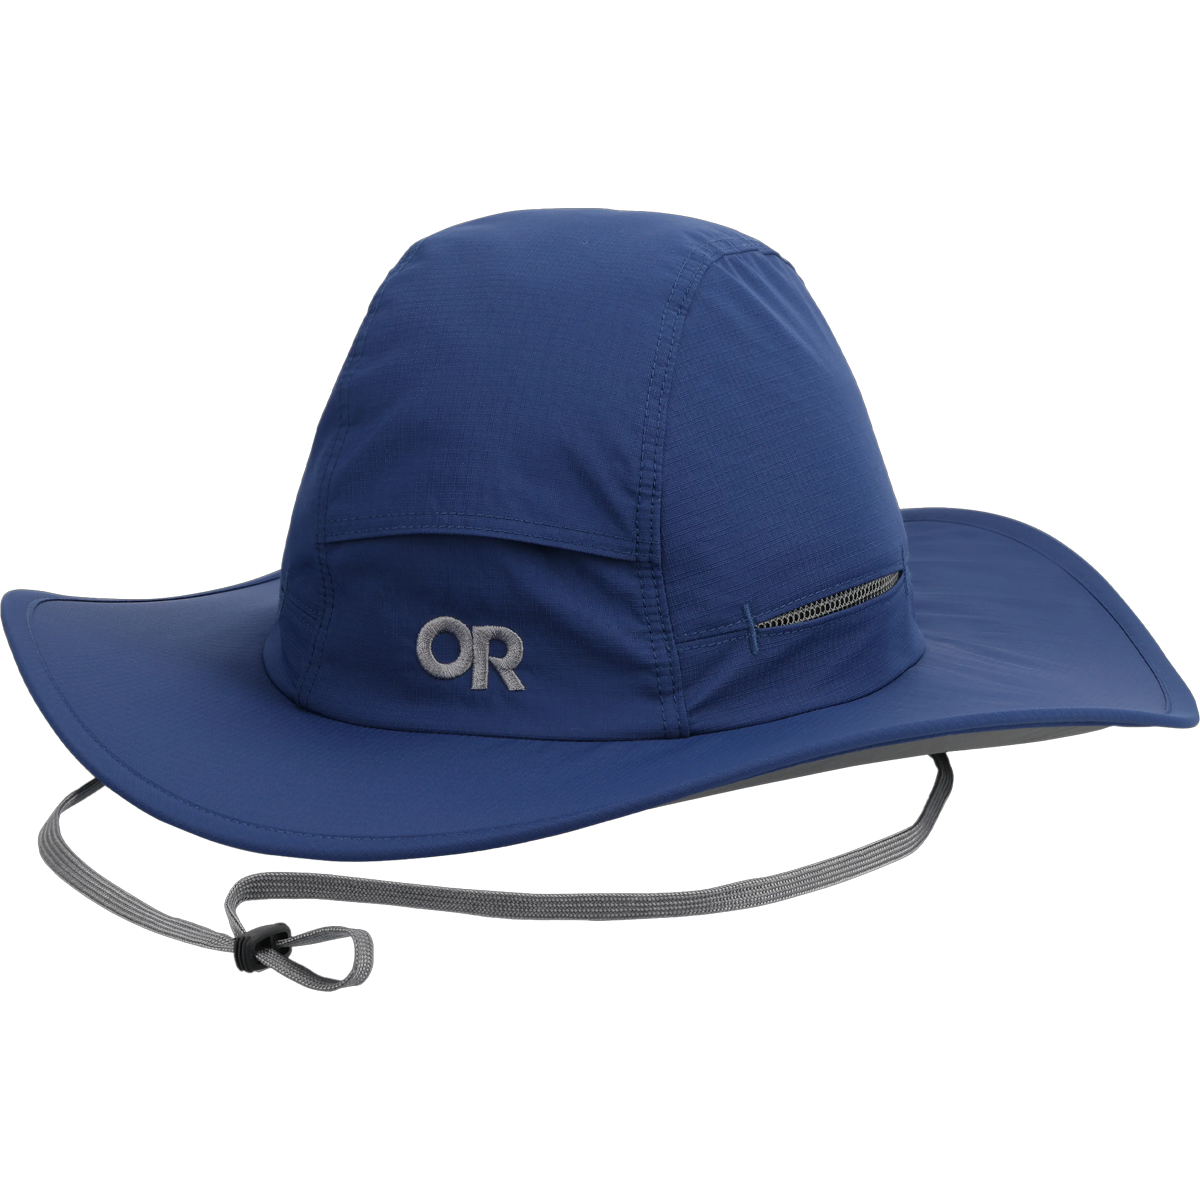 Outdoor Uv Protection Oval Bucket Hat With Cord Summer Fisherman Hats With  Wide Brim Casual Sunhat For Men Women Blue